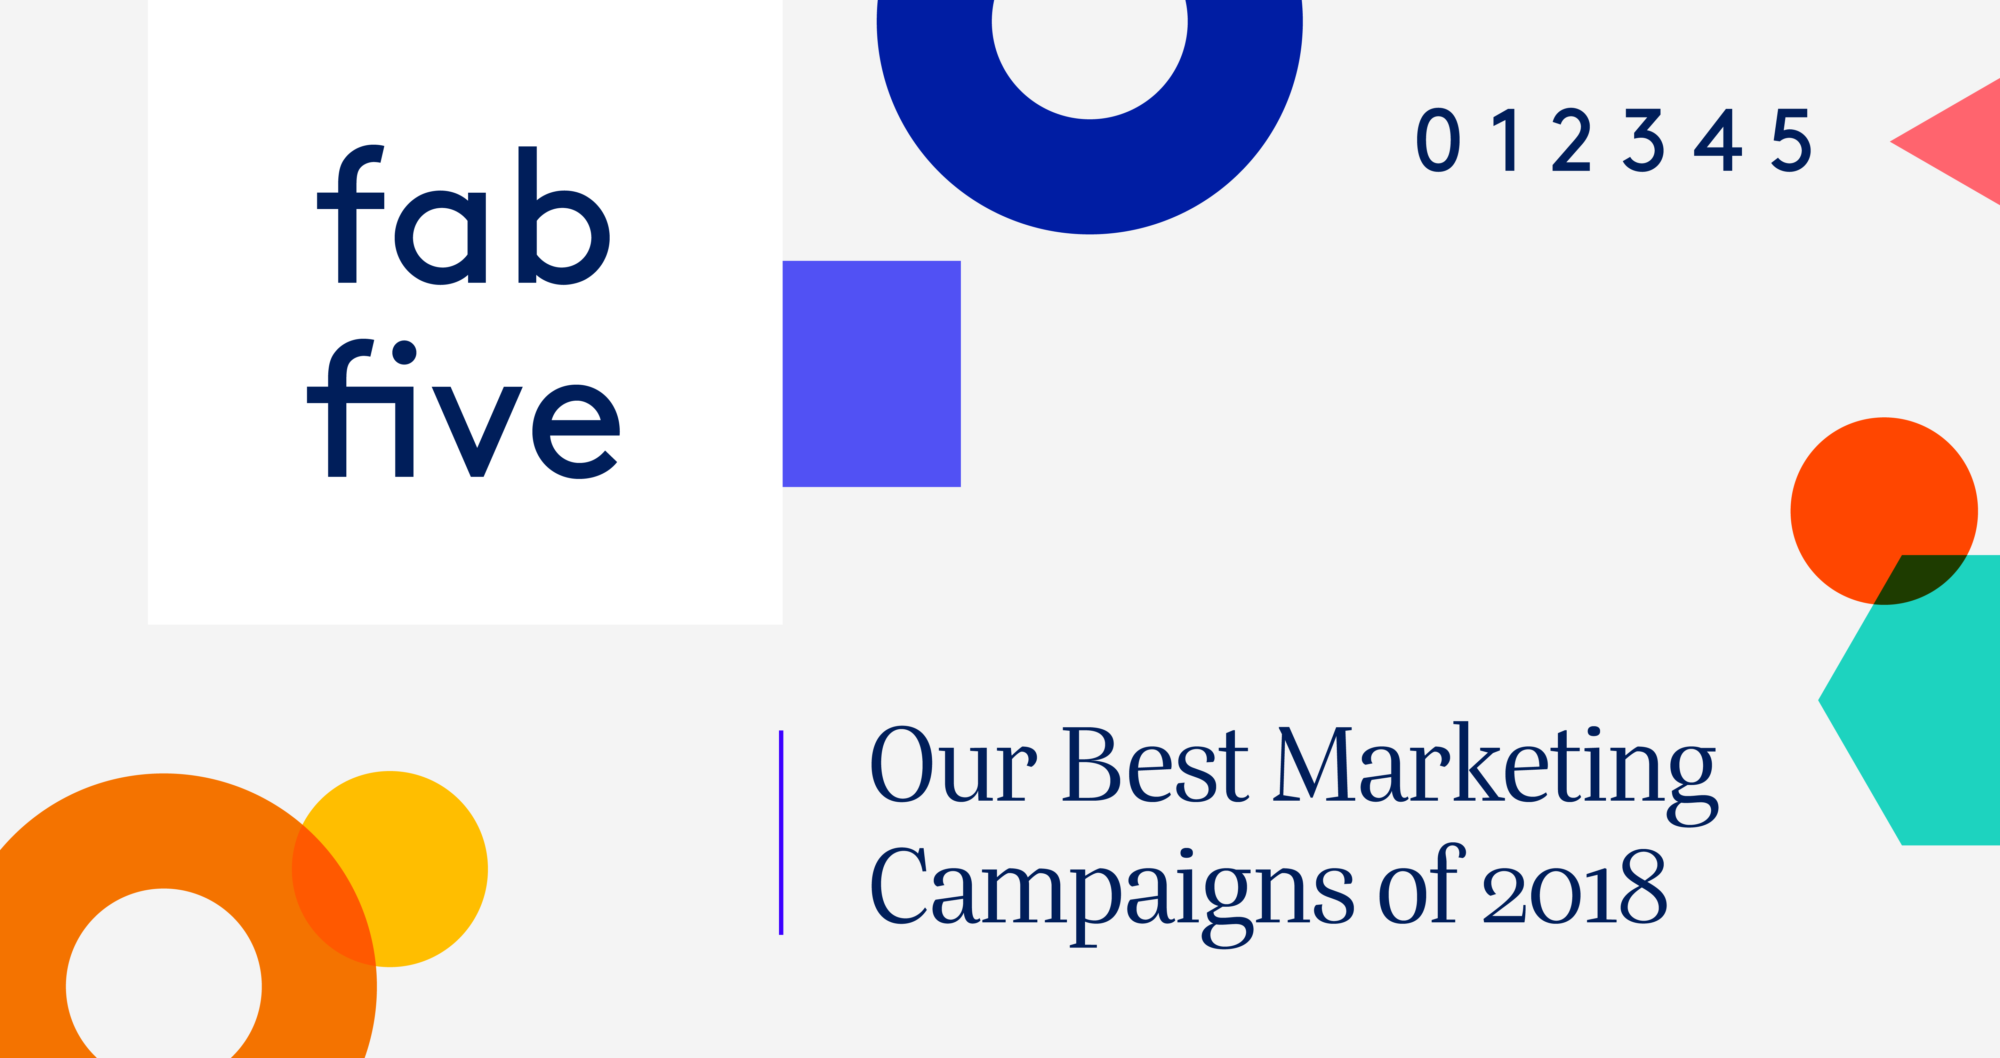 Header Image with a light grey background with colourful shapes, the title text states "fab five | Our Best Marketing Campaigns of 2018".